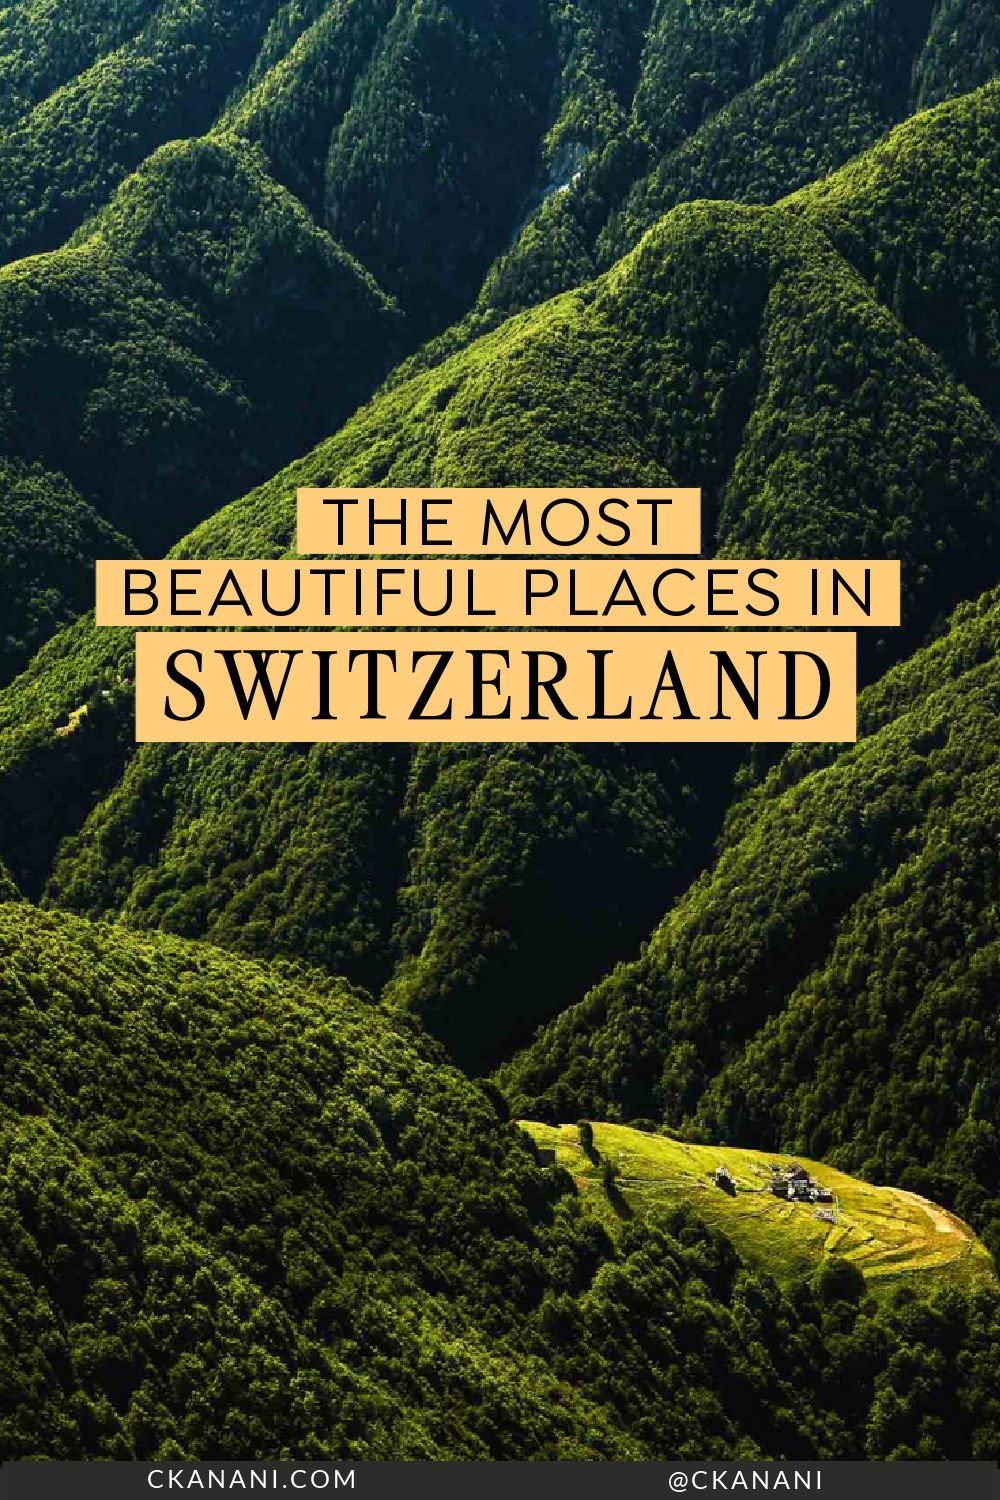 The most beautiful places in Switzerland! Switzerland travel, Swiss travel, Switzerland vacation, amazing places, Switzerland bucket list, things to do in Switzerland, Europe destinations